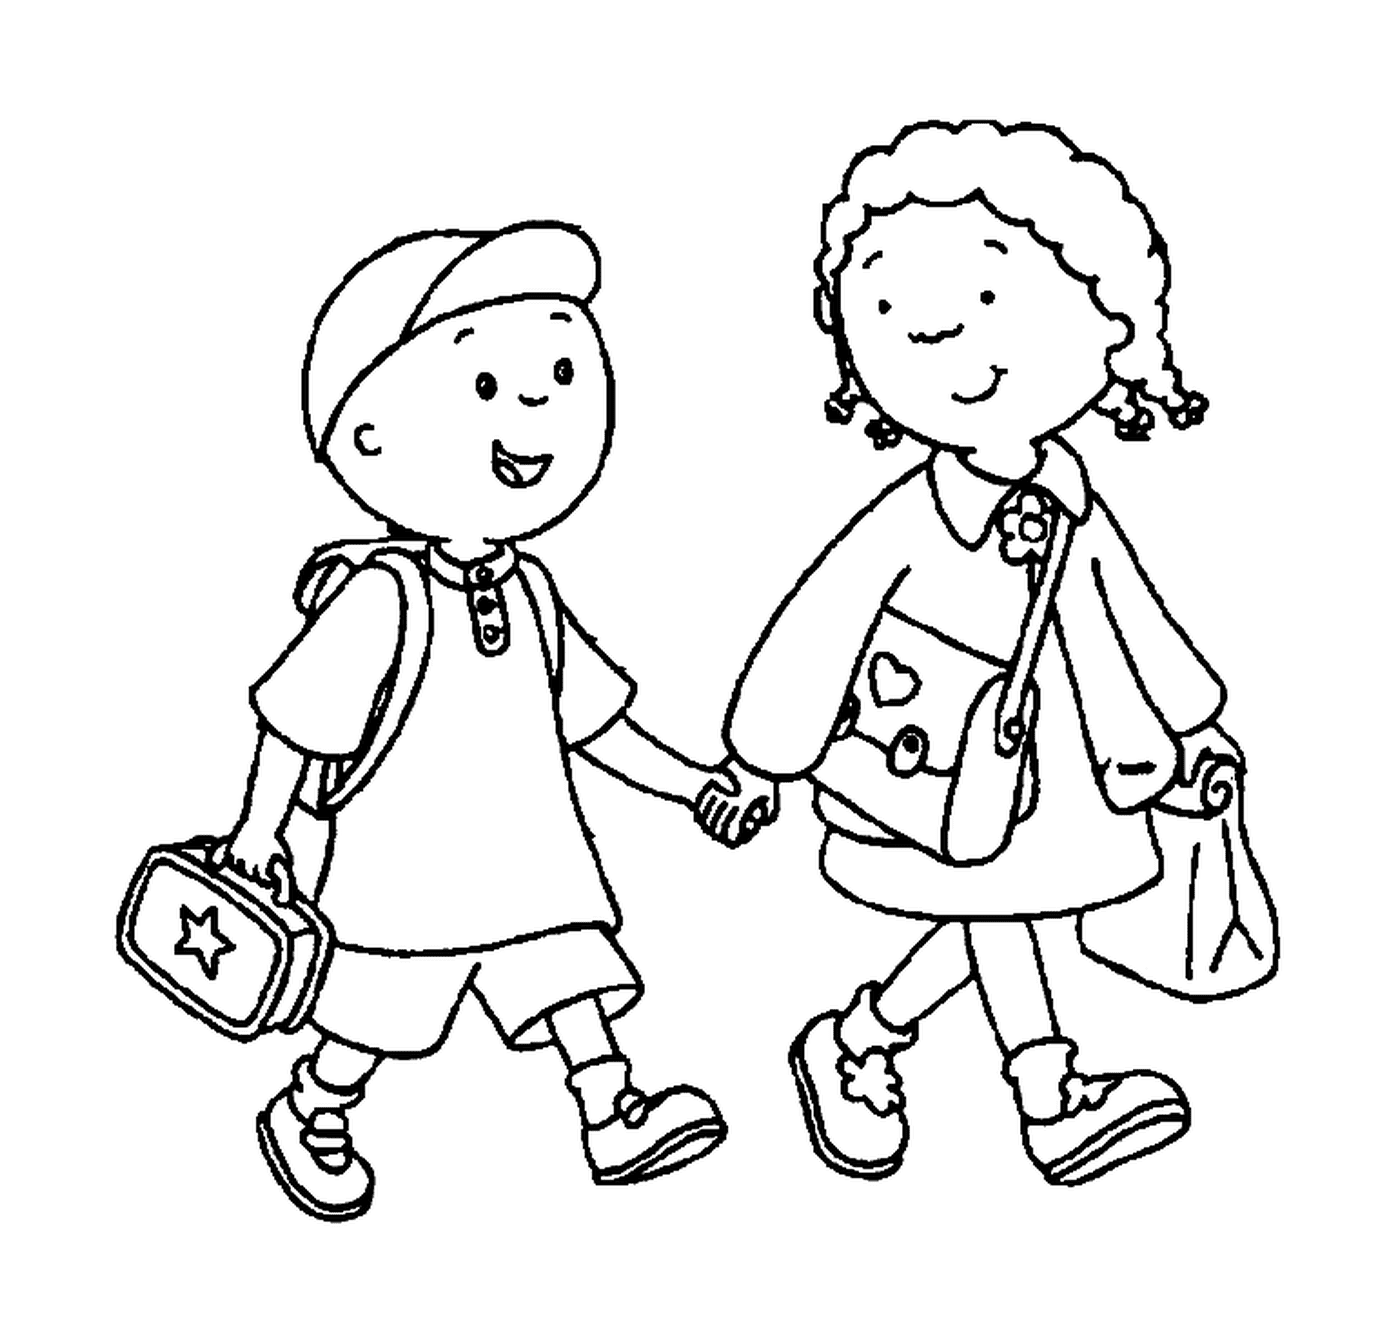  A brother and a sister holding hands to go to school 